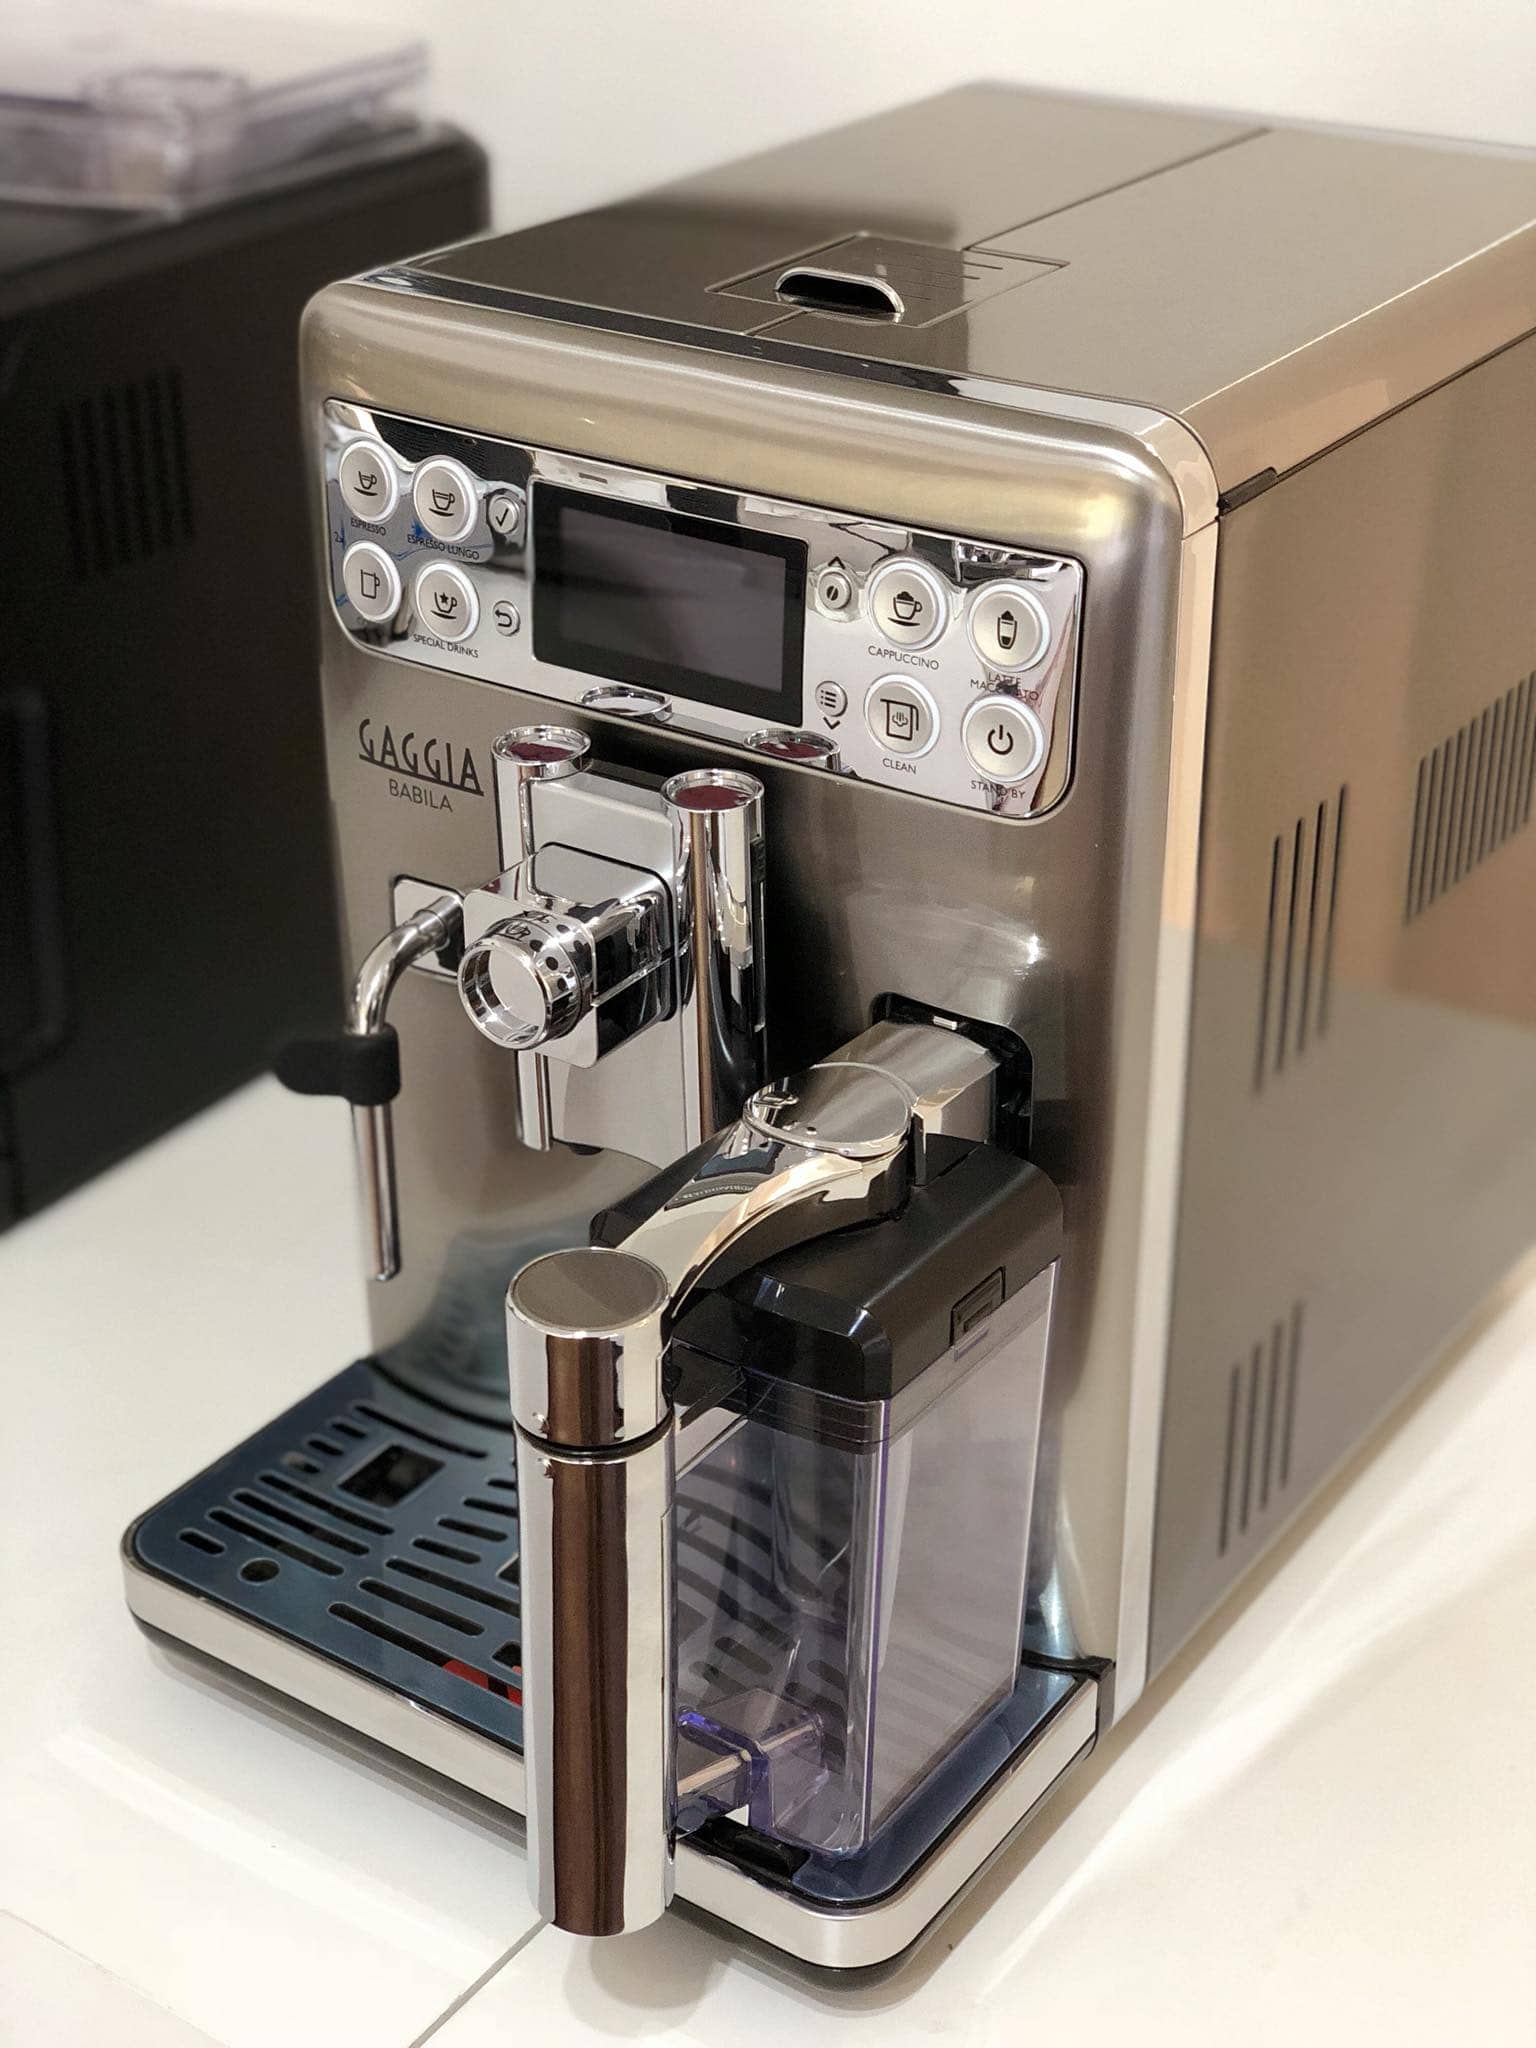 Gaggia Babila has a very convenient top-loaded water tank